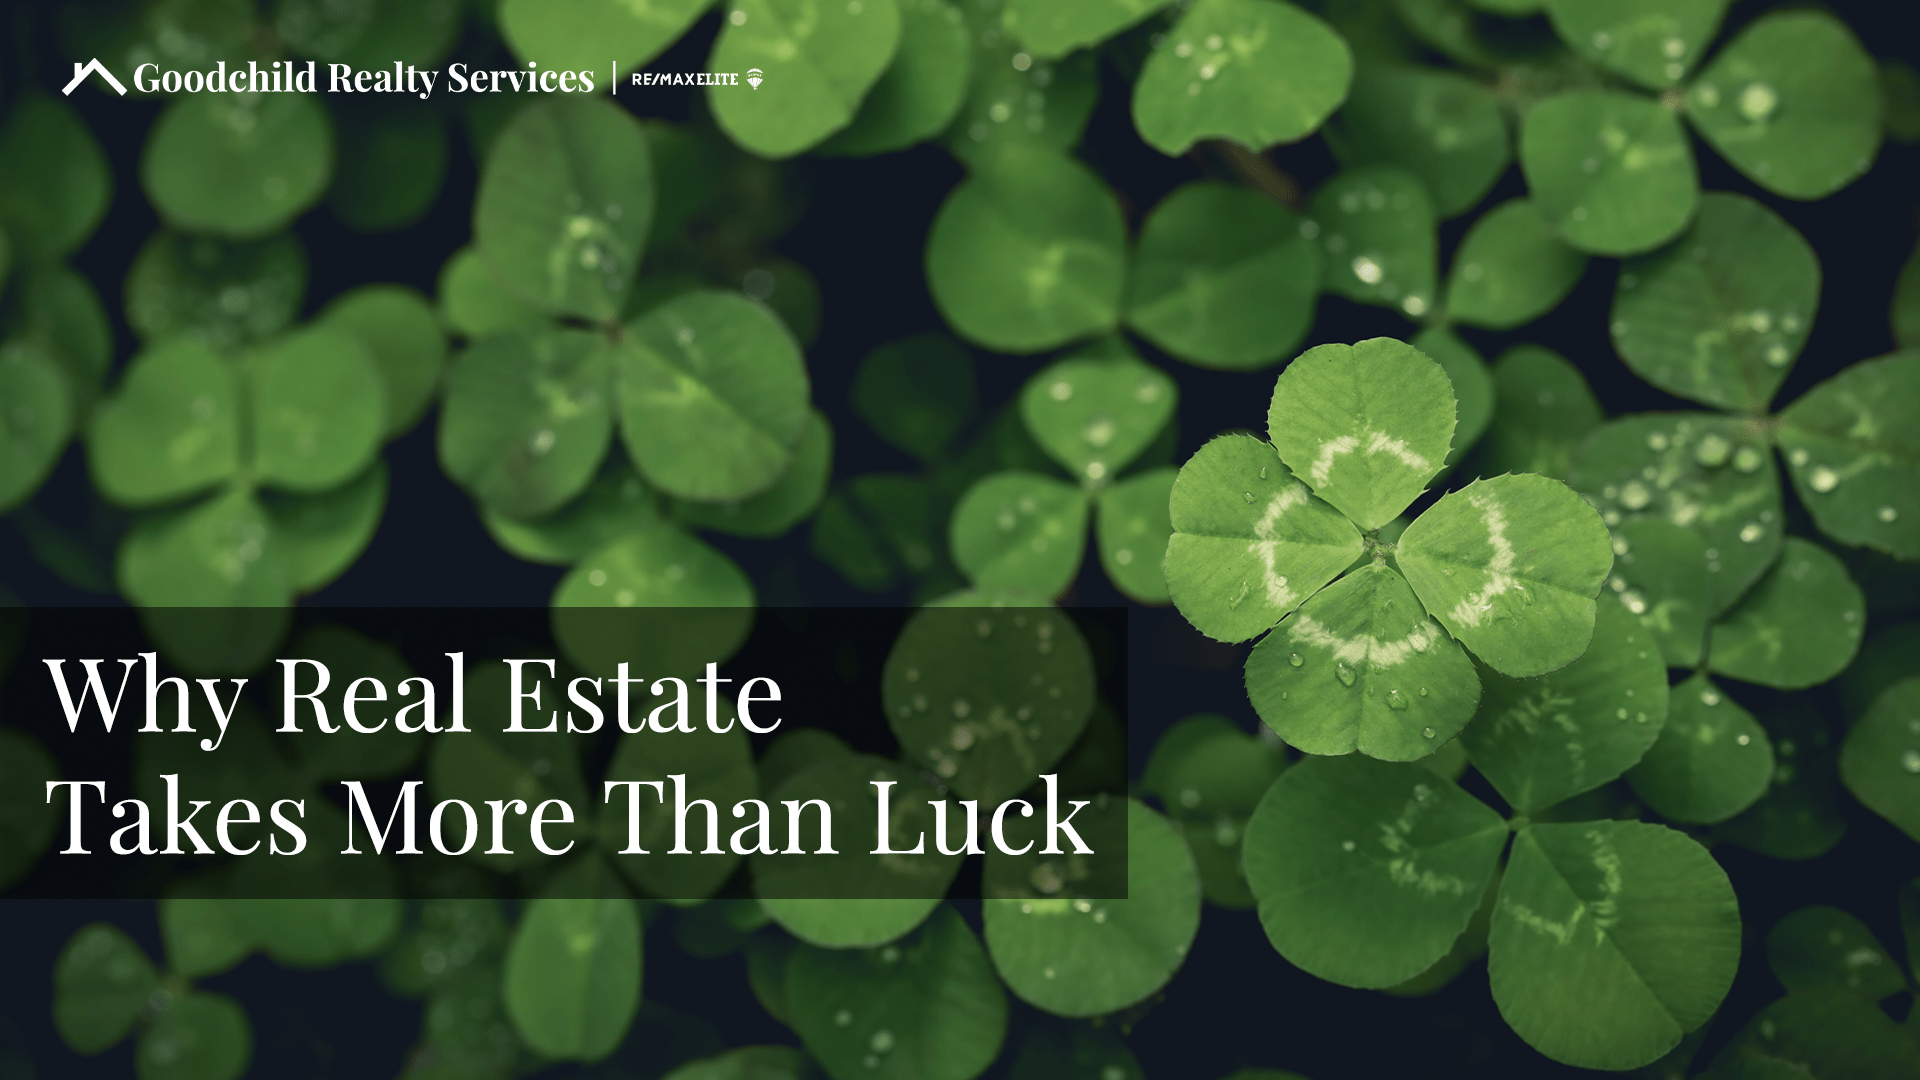 Why Real Estate Takes More Than Luck